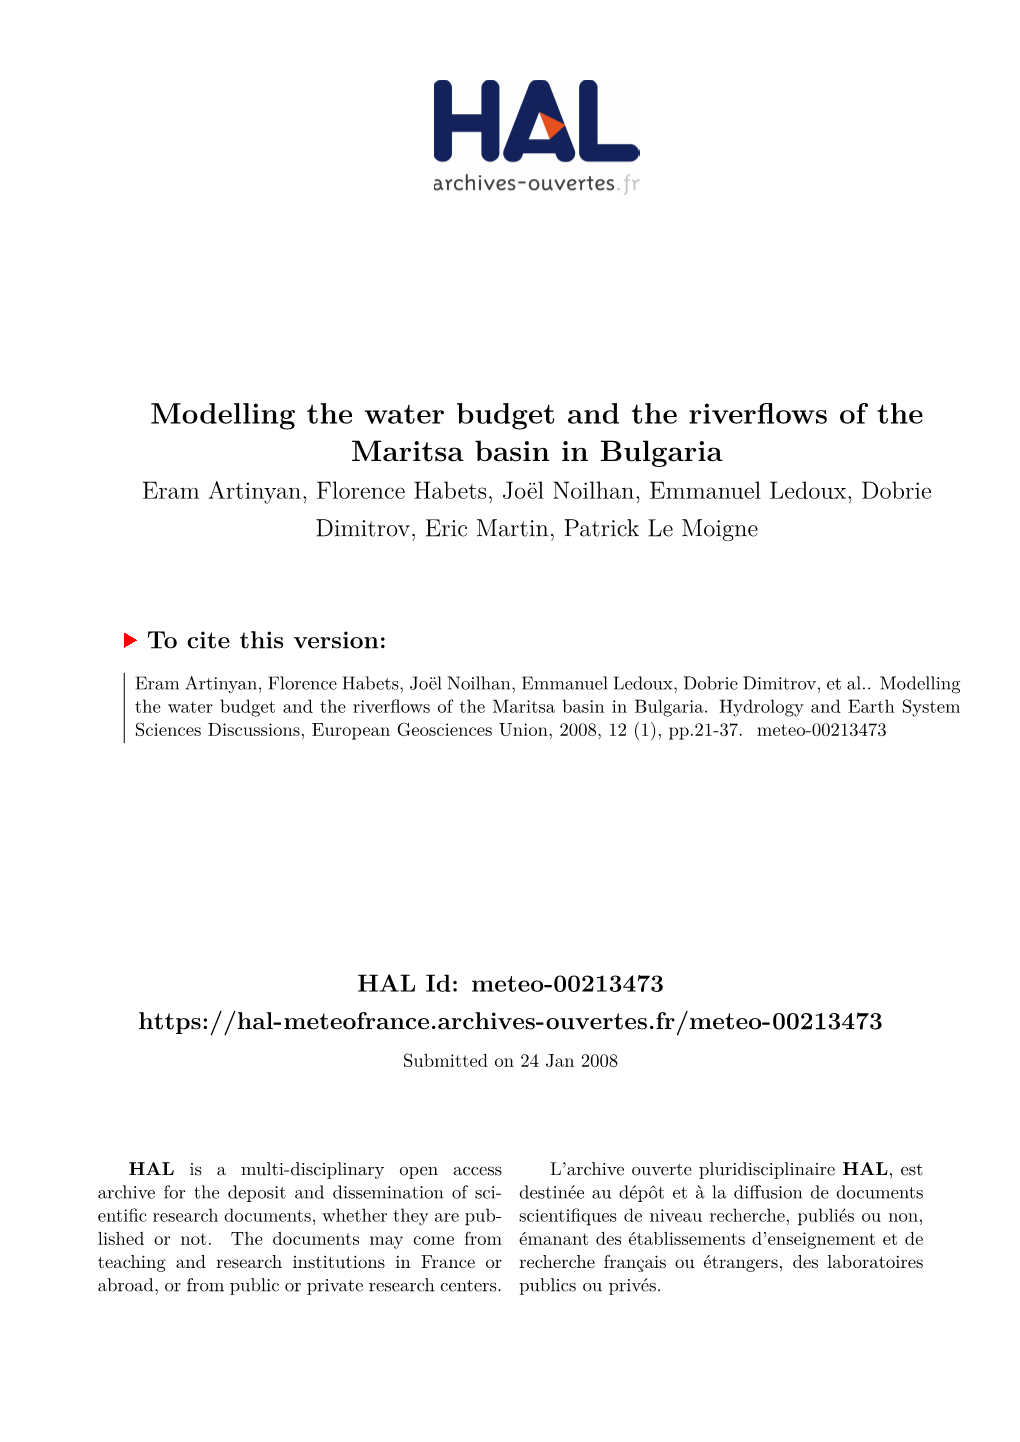 Modelling the Water Budget and the Riverflows of the Maritsa